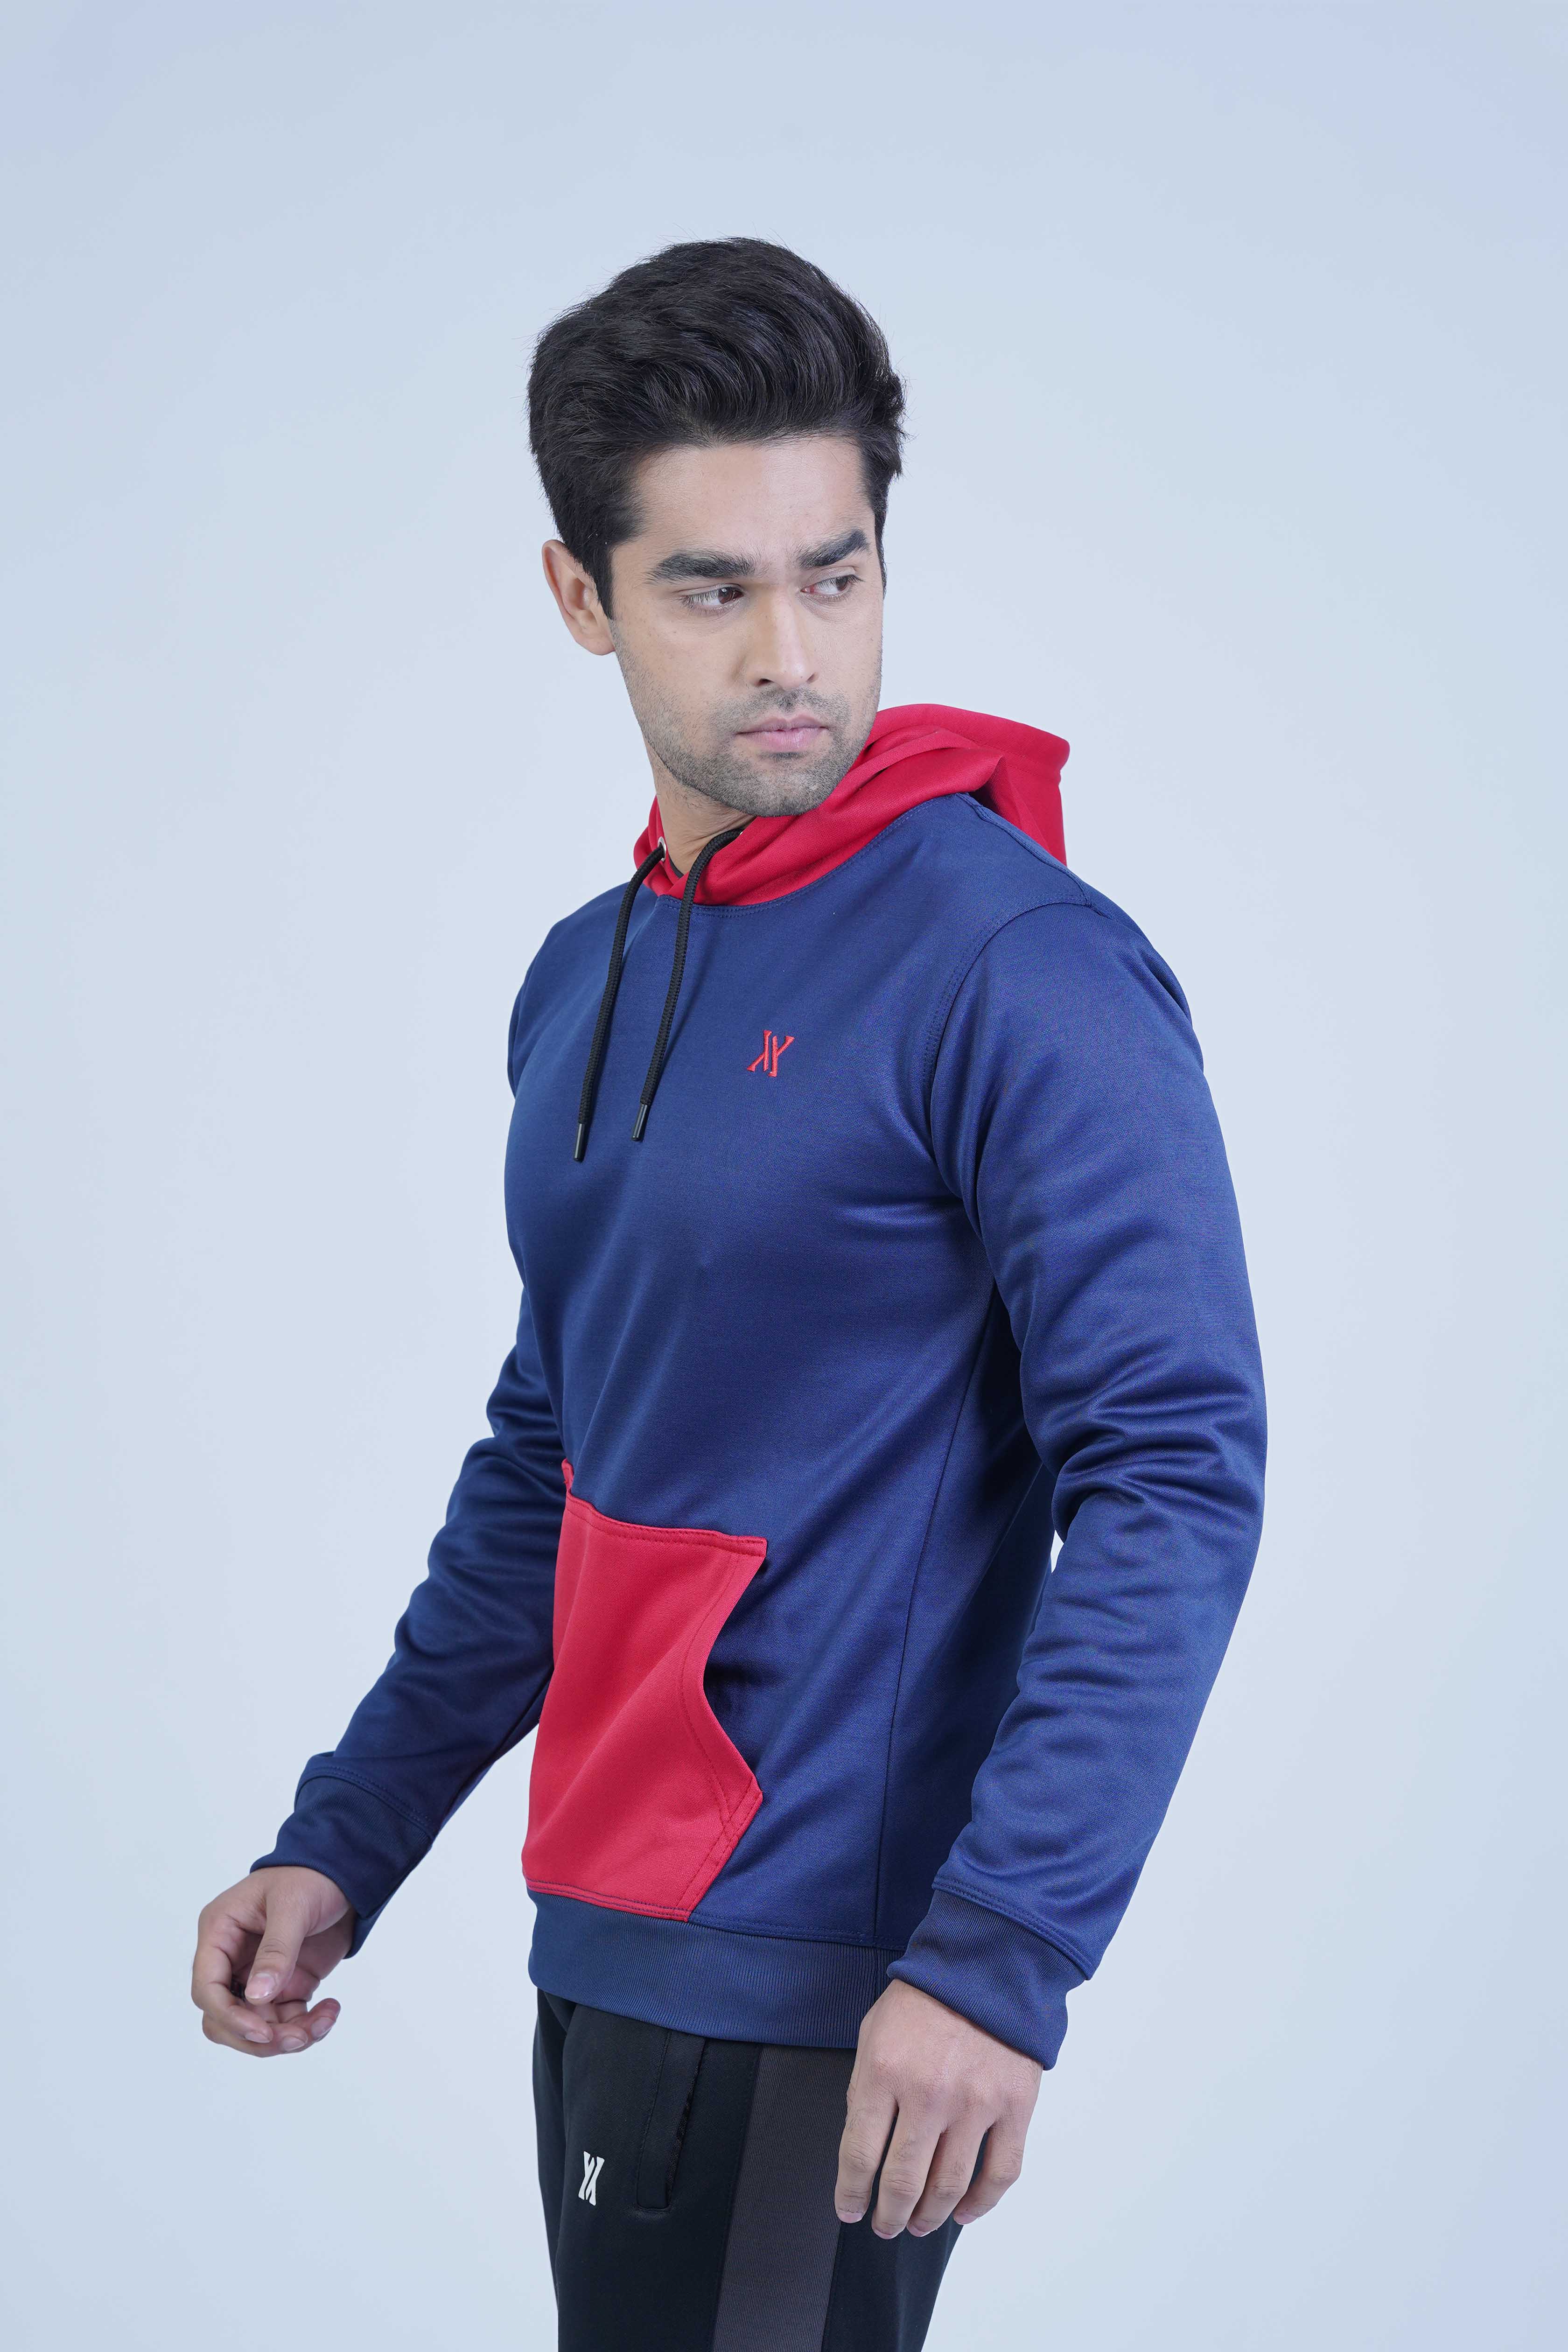 Relaxed Fit Navy Blue Hoodie from The Xea